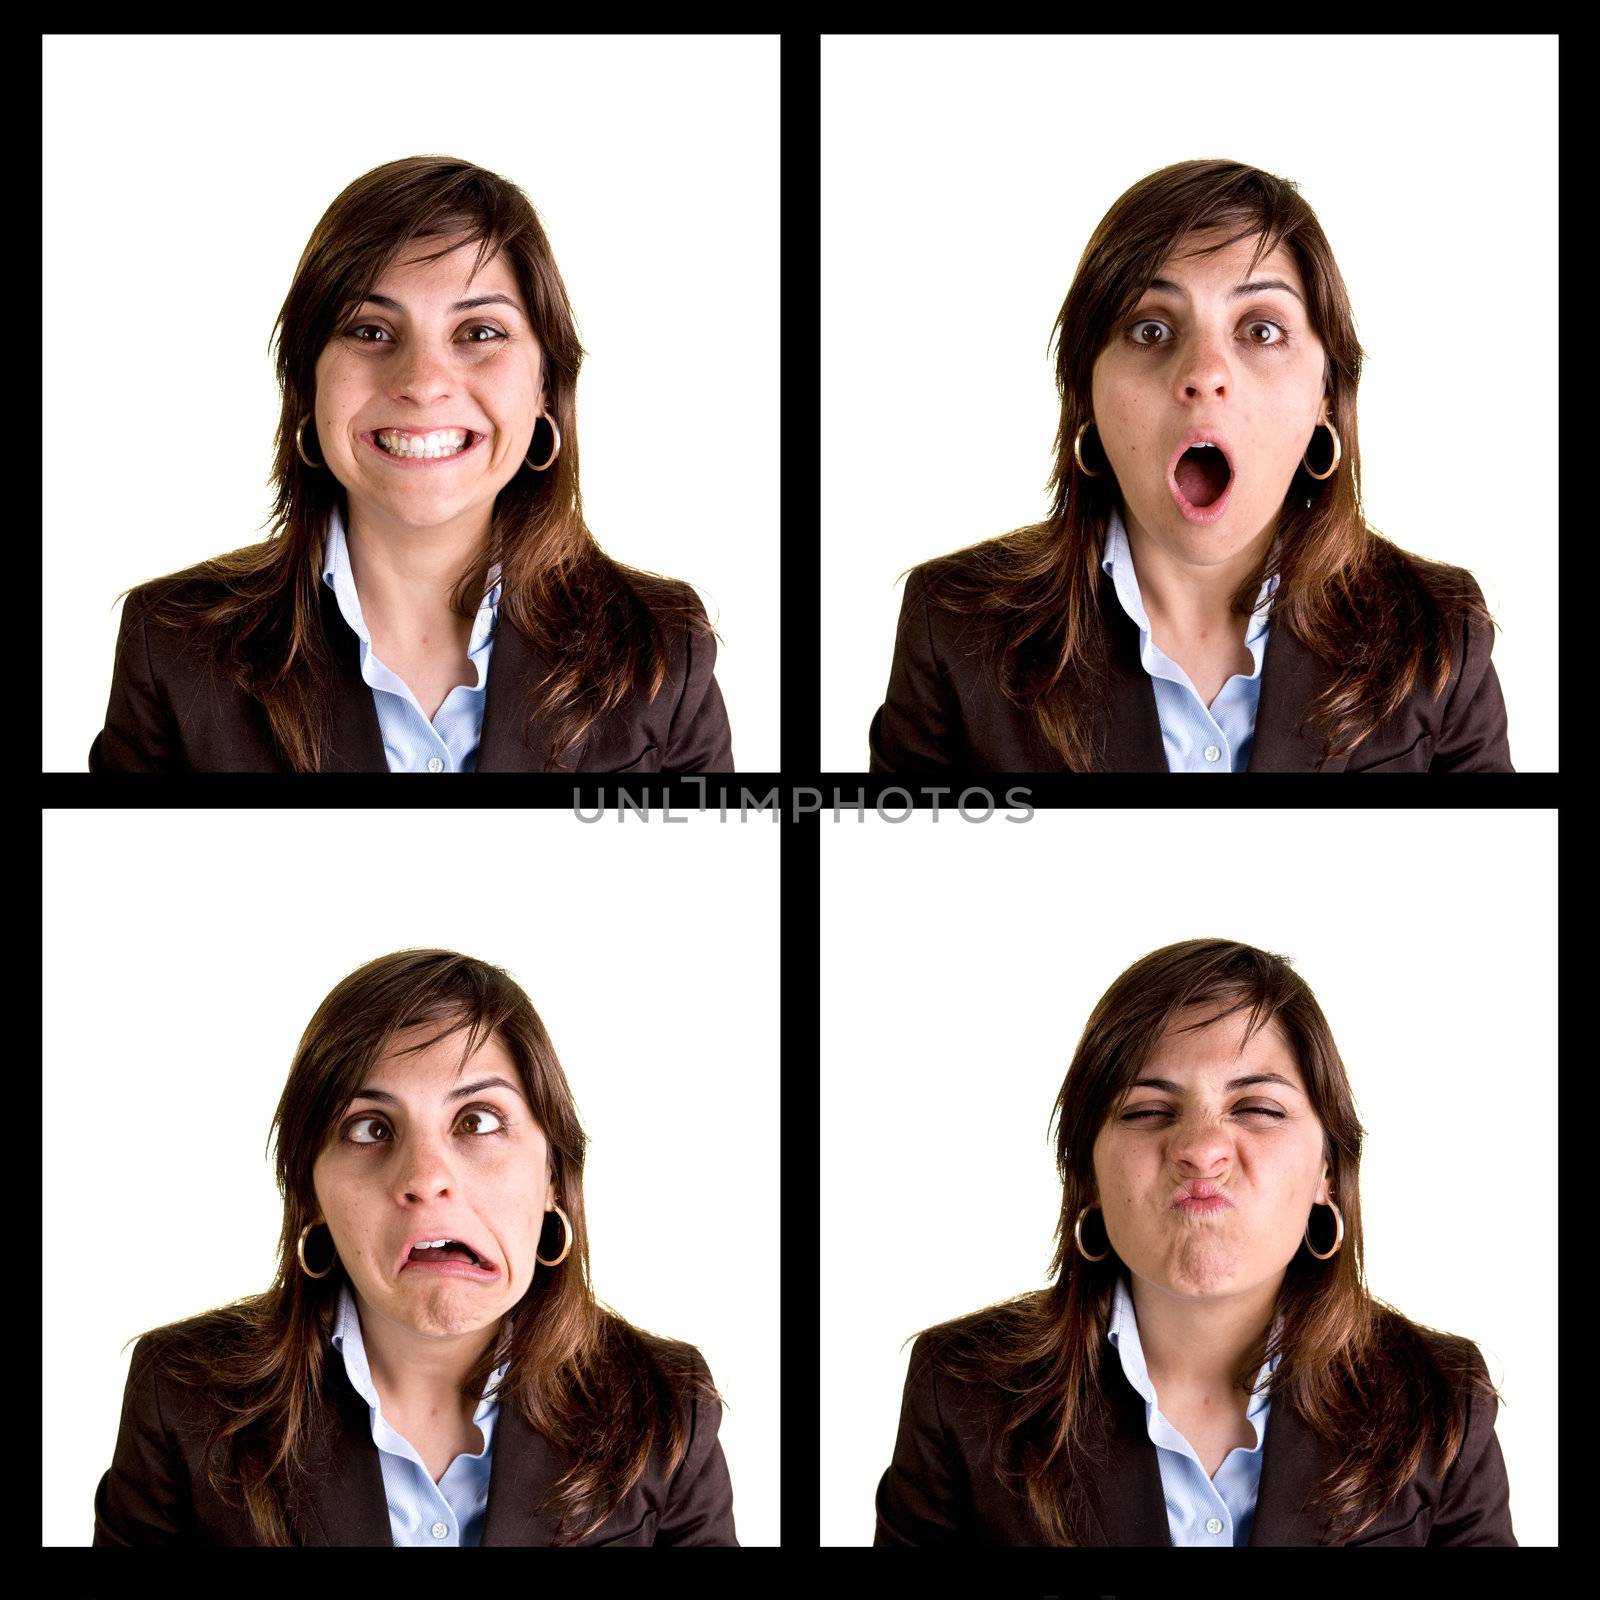 Collection of 4 businesswoman portraits with happy and funny expressions - each photo has 3000px wide